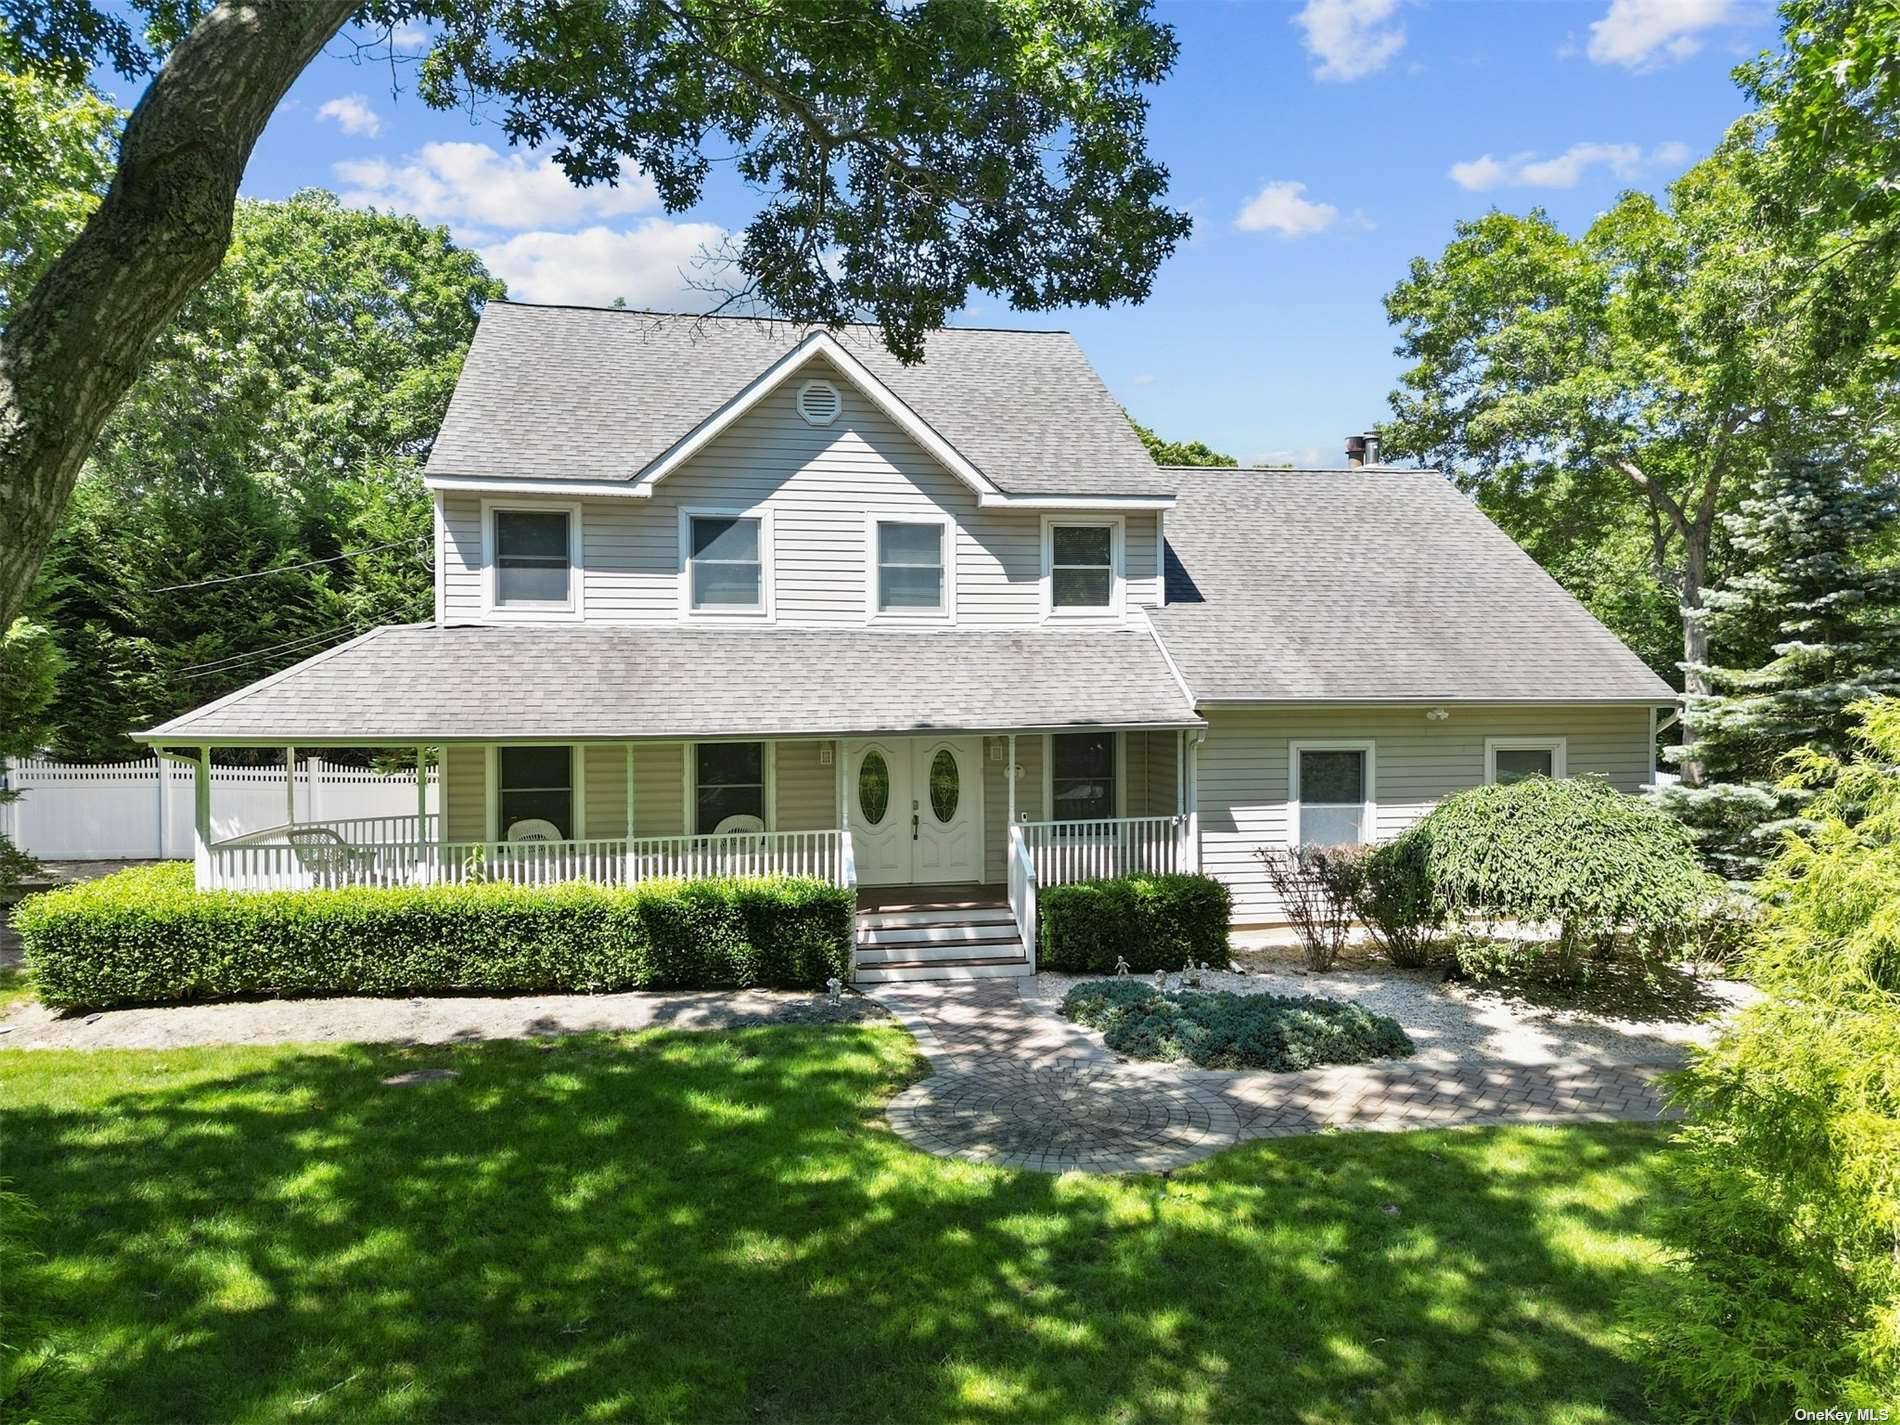 This luxurious 5 bed, 4 bath oversized colonial home with a wrap around porch sits on nearly an acre of beautifully landscaped property.